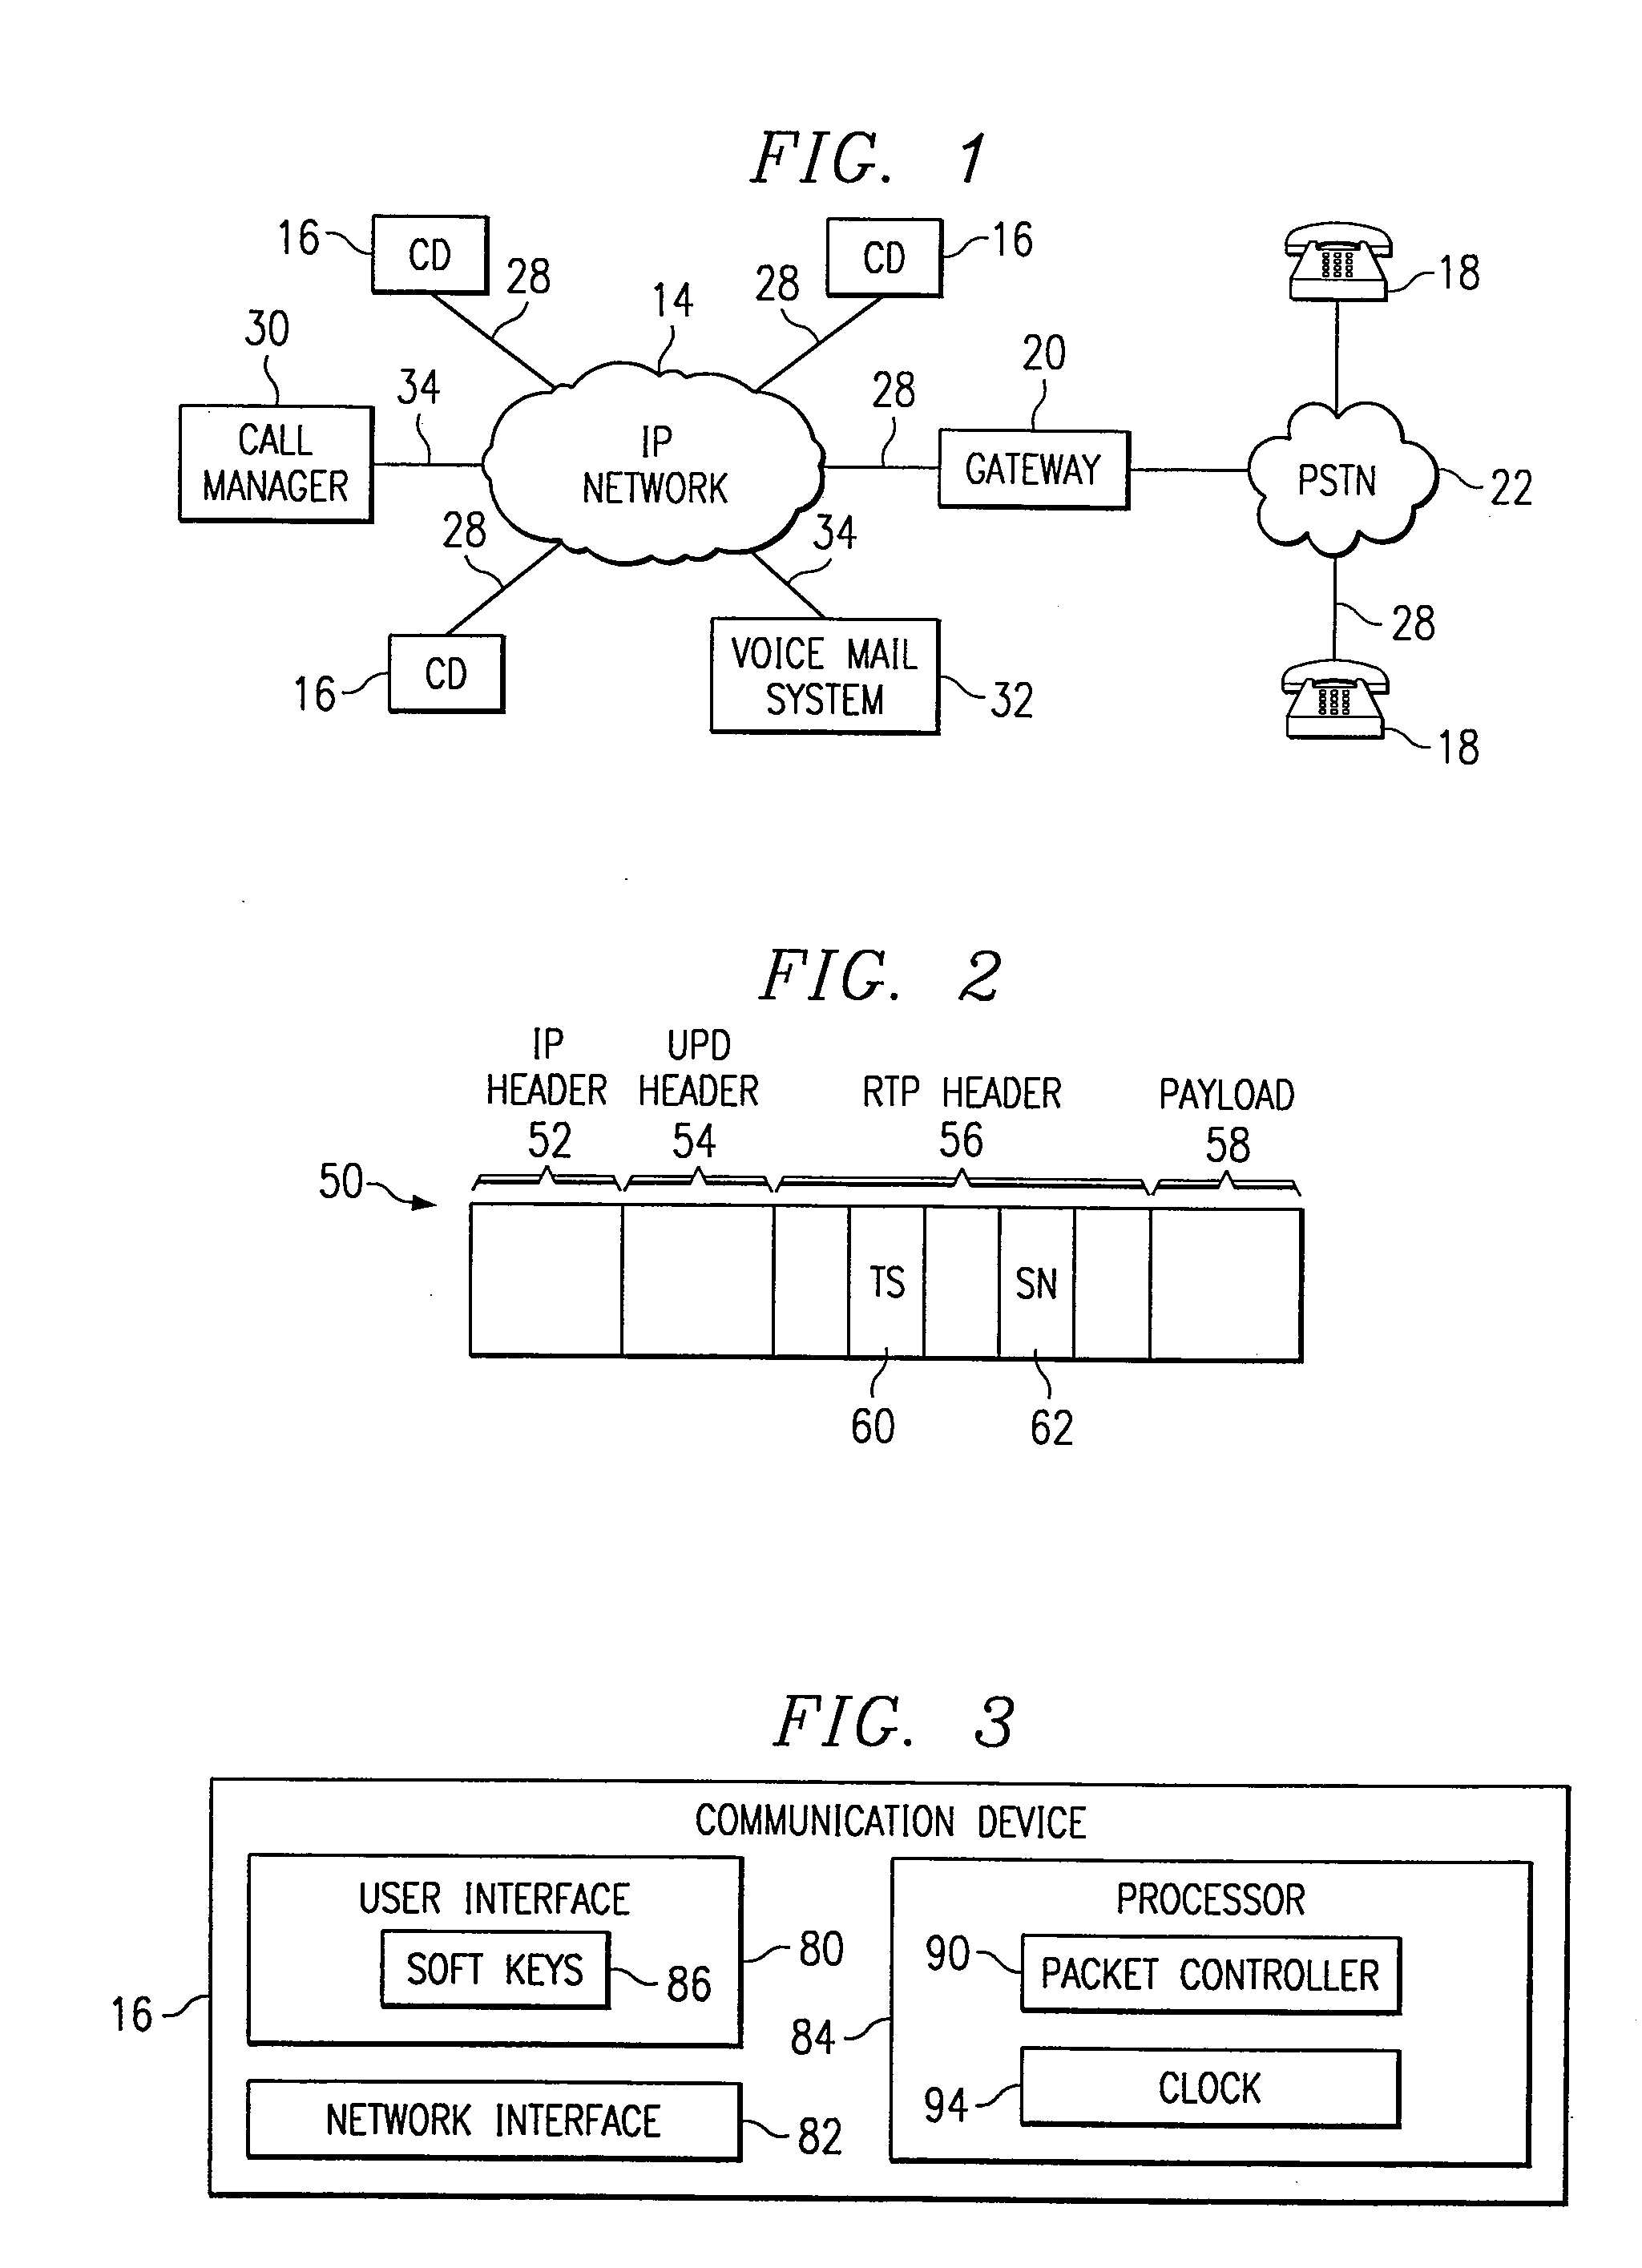 Method and System for Call Answer While Connected to Voice Mail